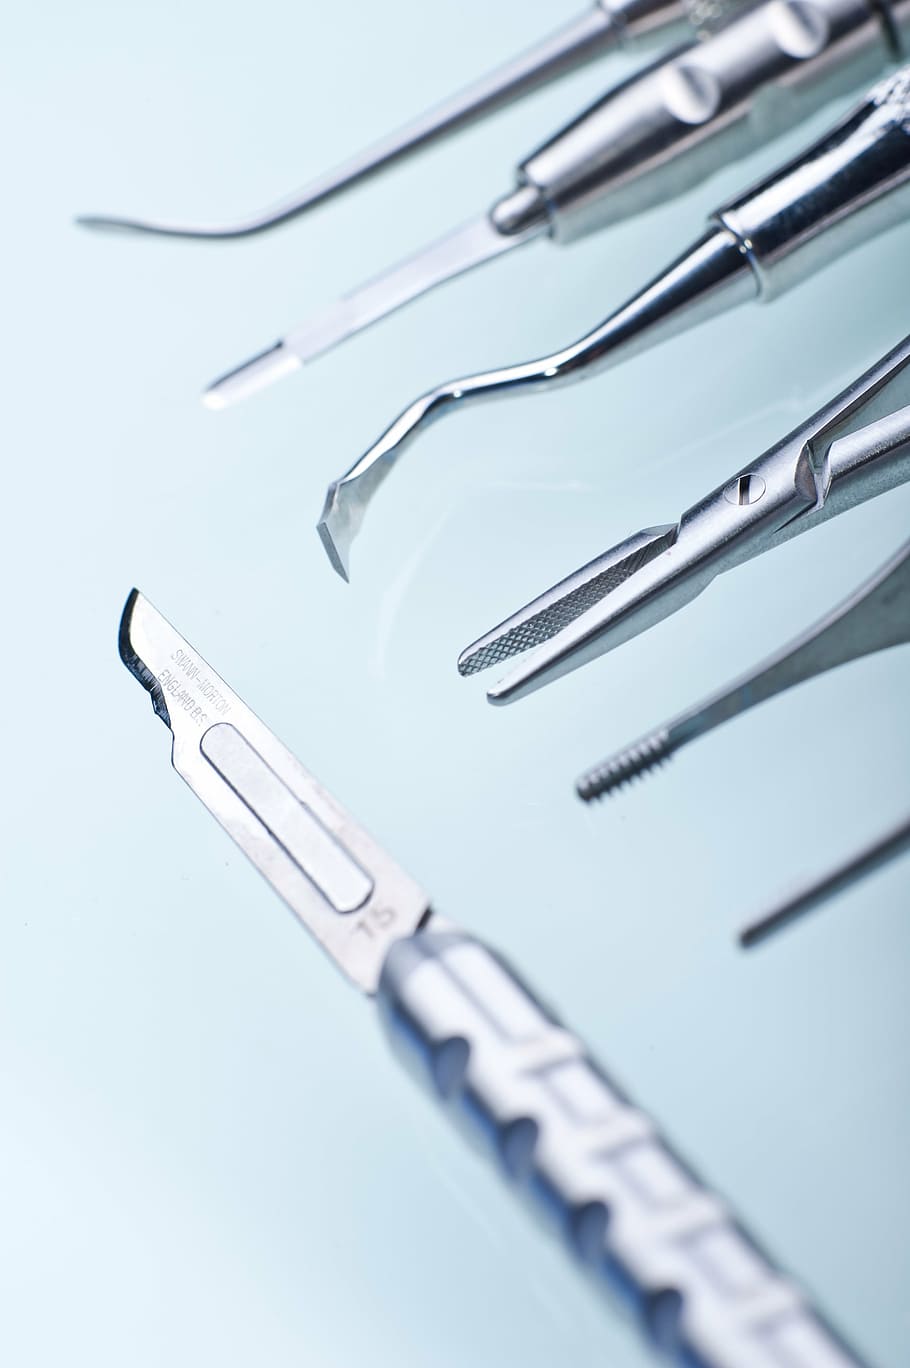 A group of dental instruments on a table - Dentist